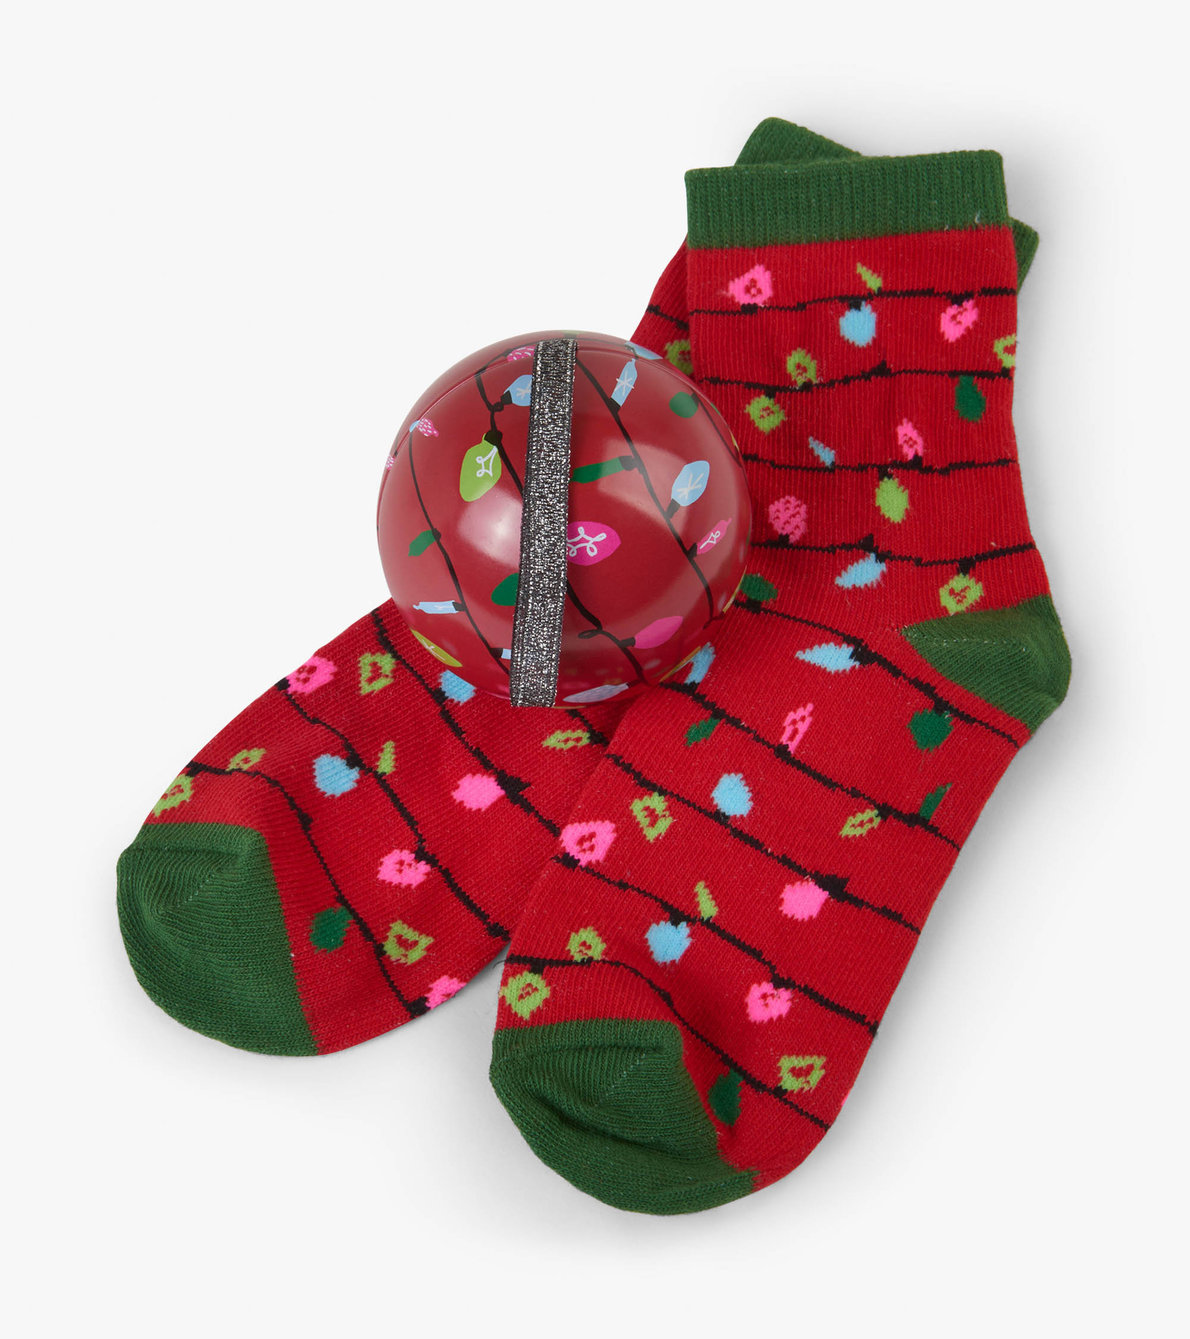 View larger image of Red Northern Lights Kids Socks in Balls